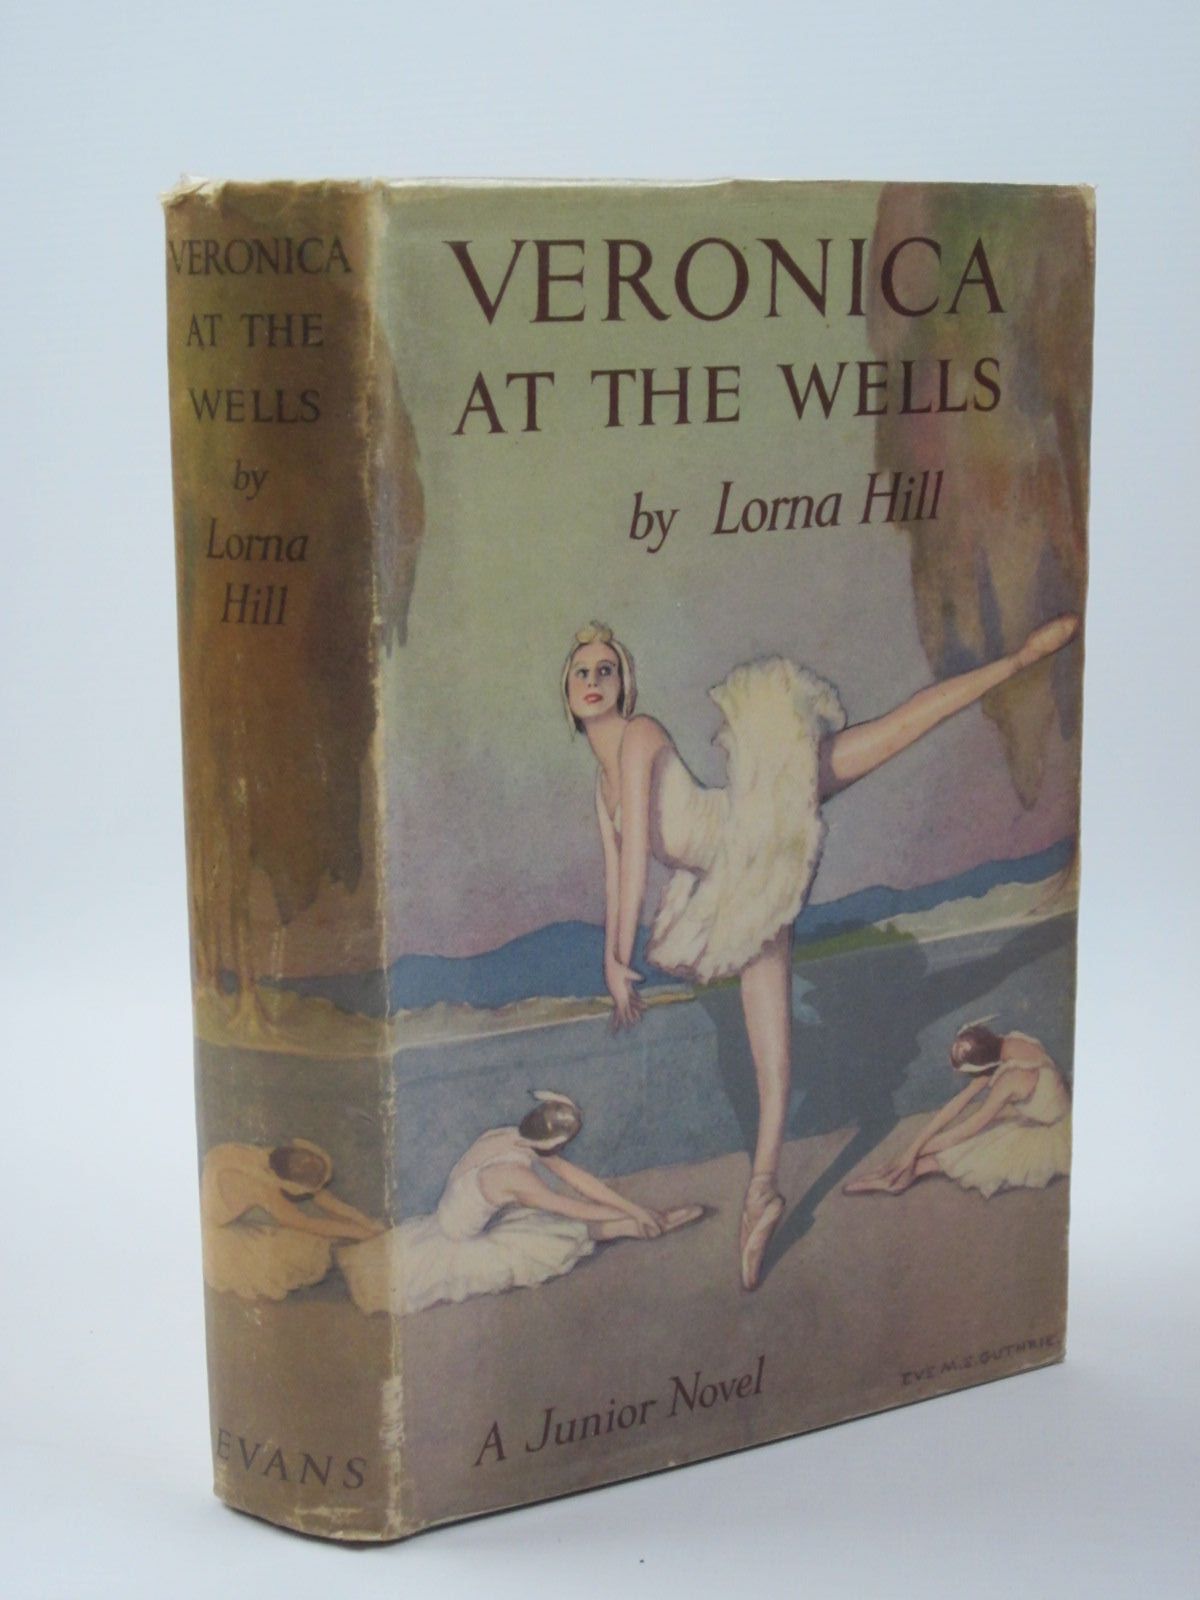 Cover of VERONICA AT THE WELLS by Lorna Hill